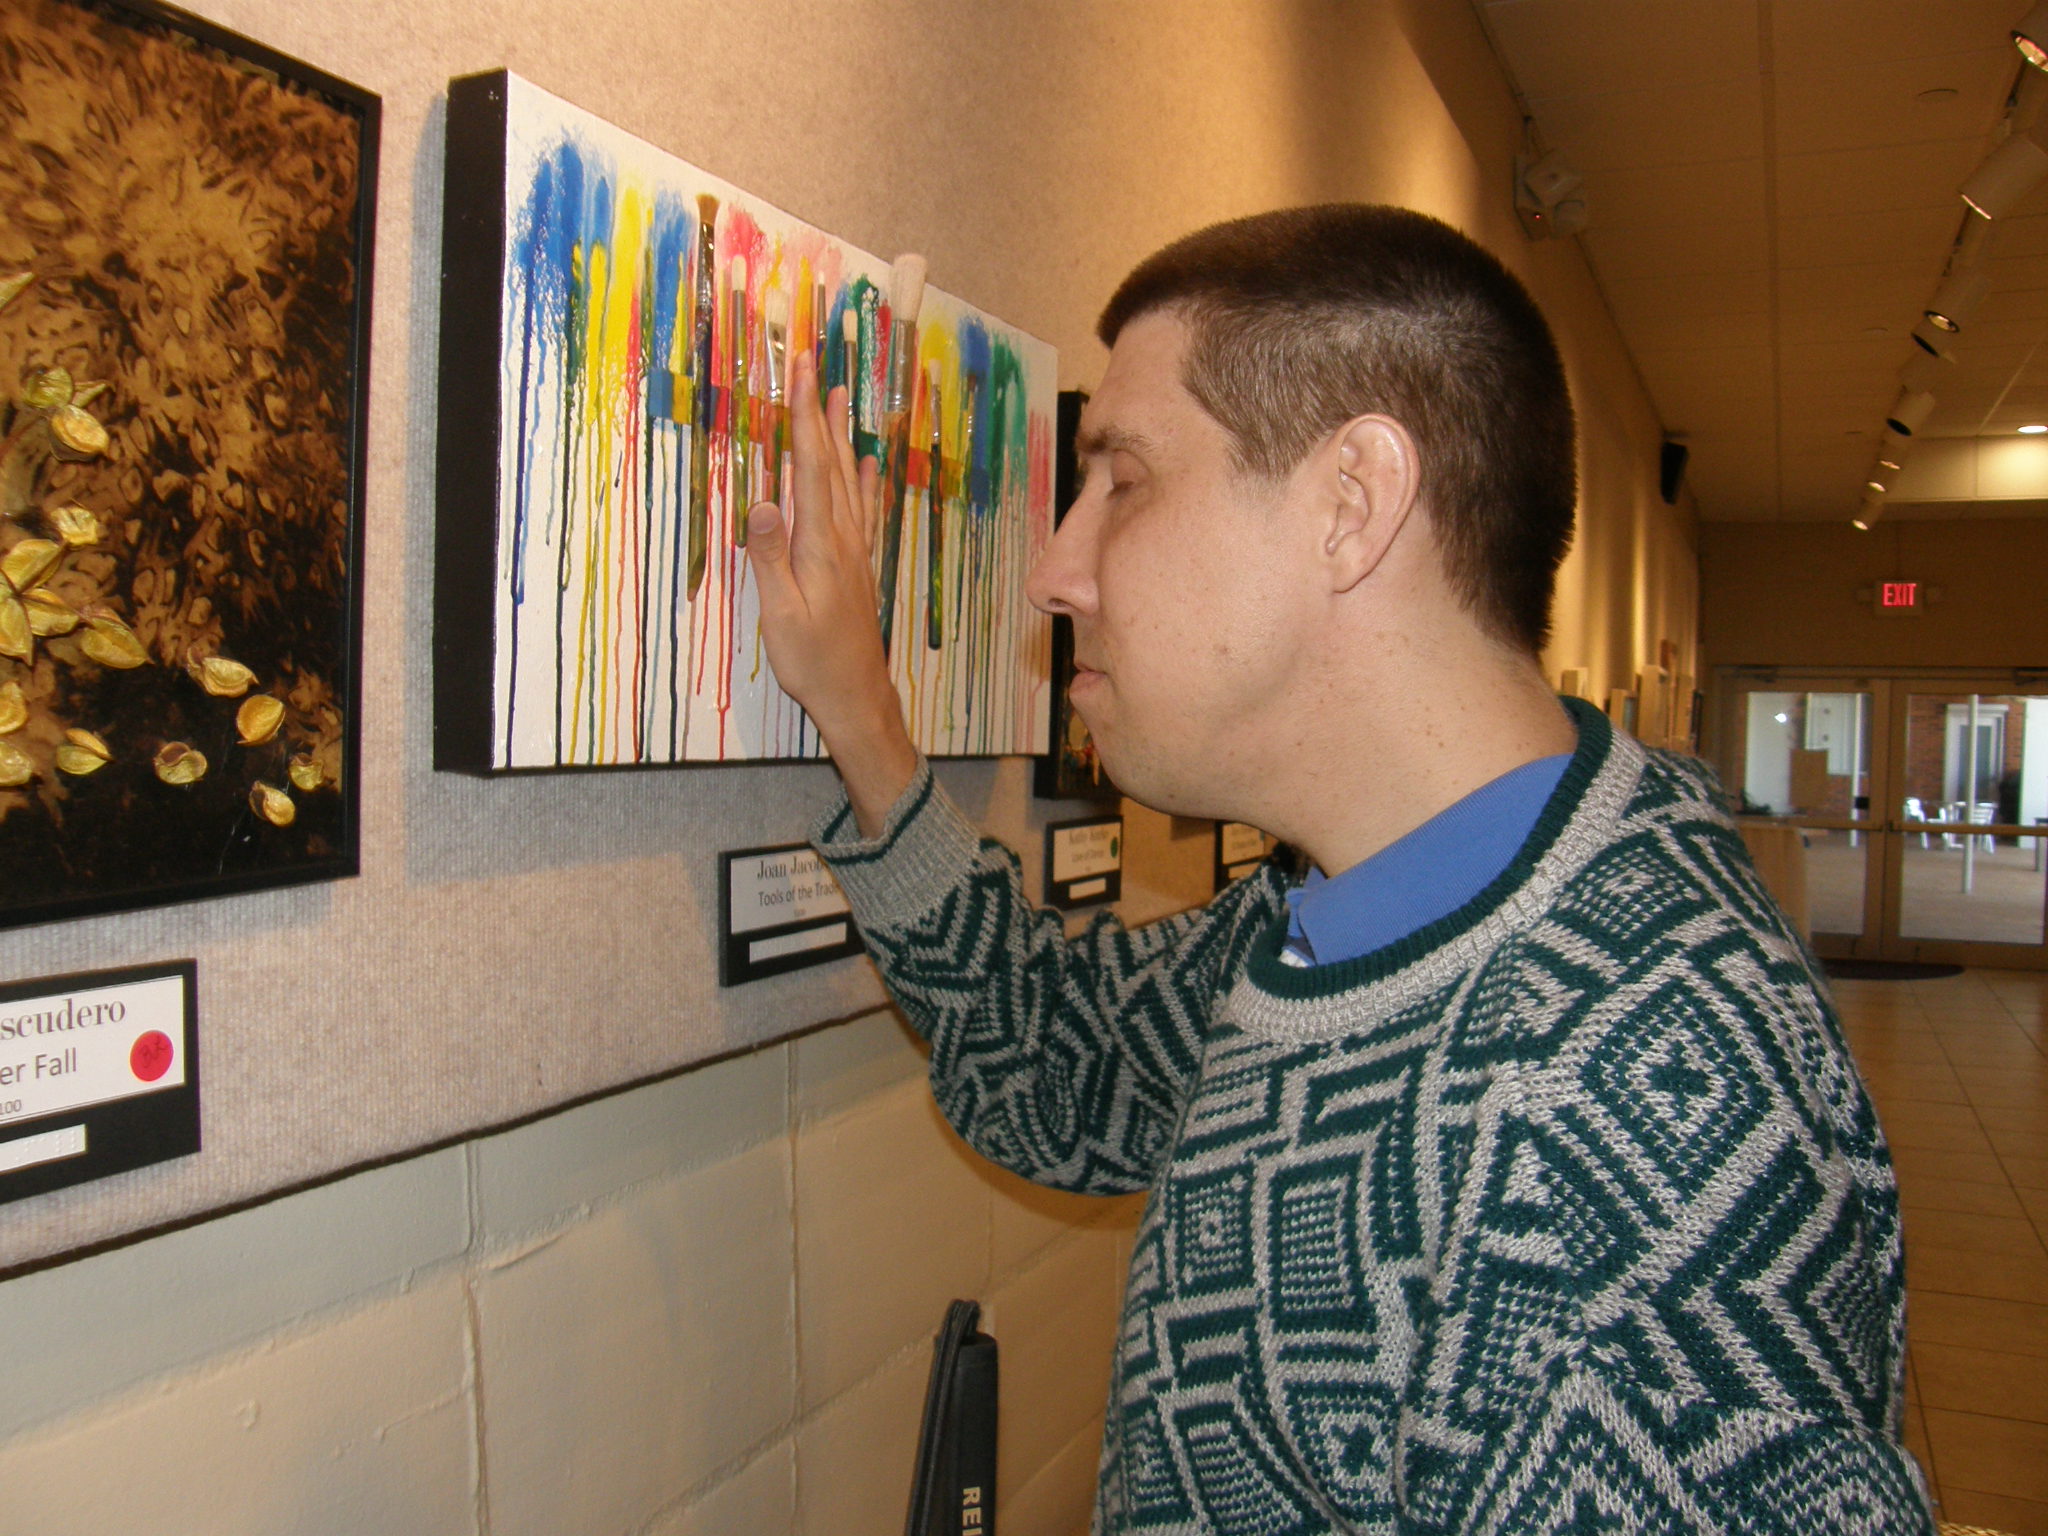 Scott Larson touches the tactile artwork hanging on the wall at the "A Touch of Art" exhibit